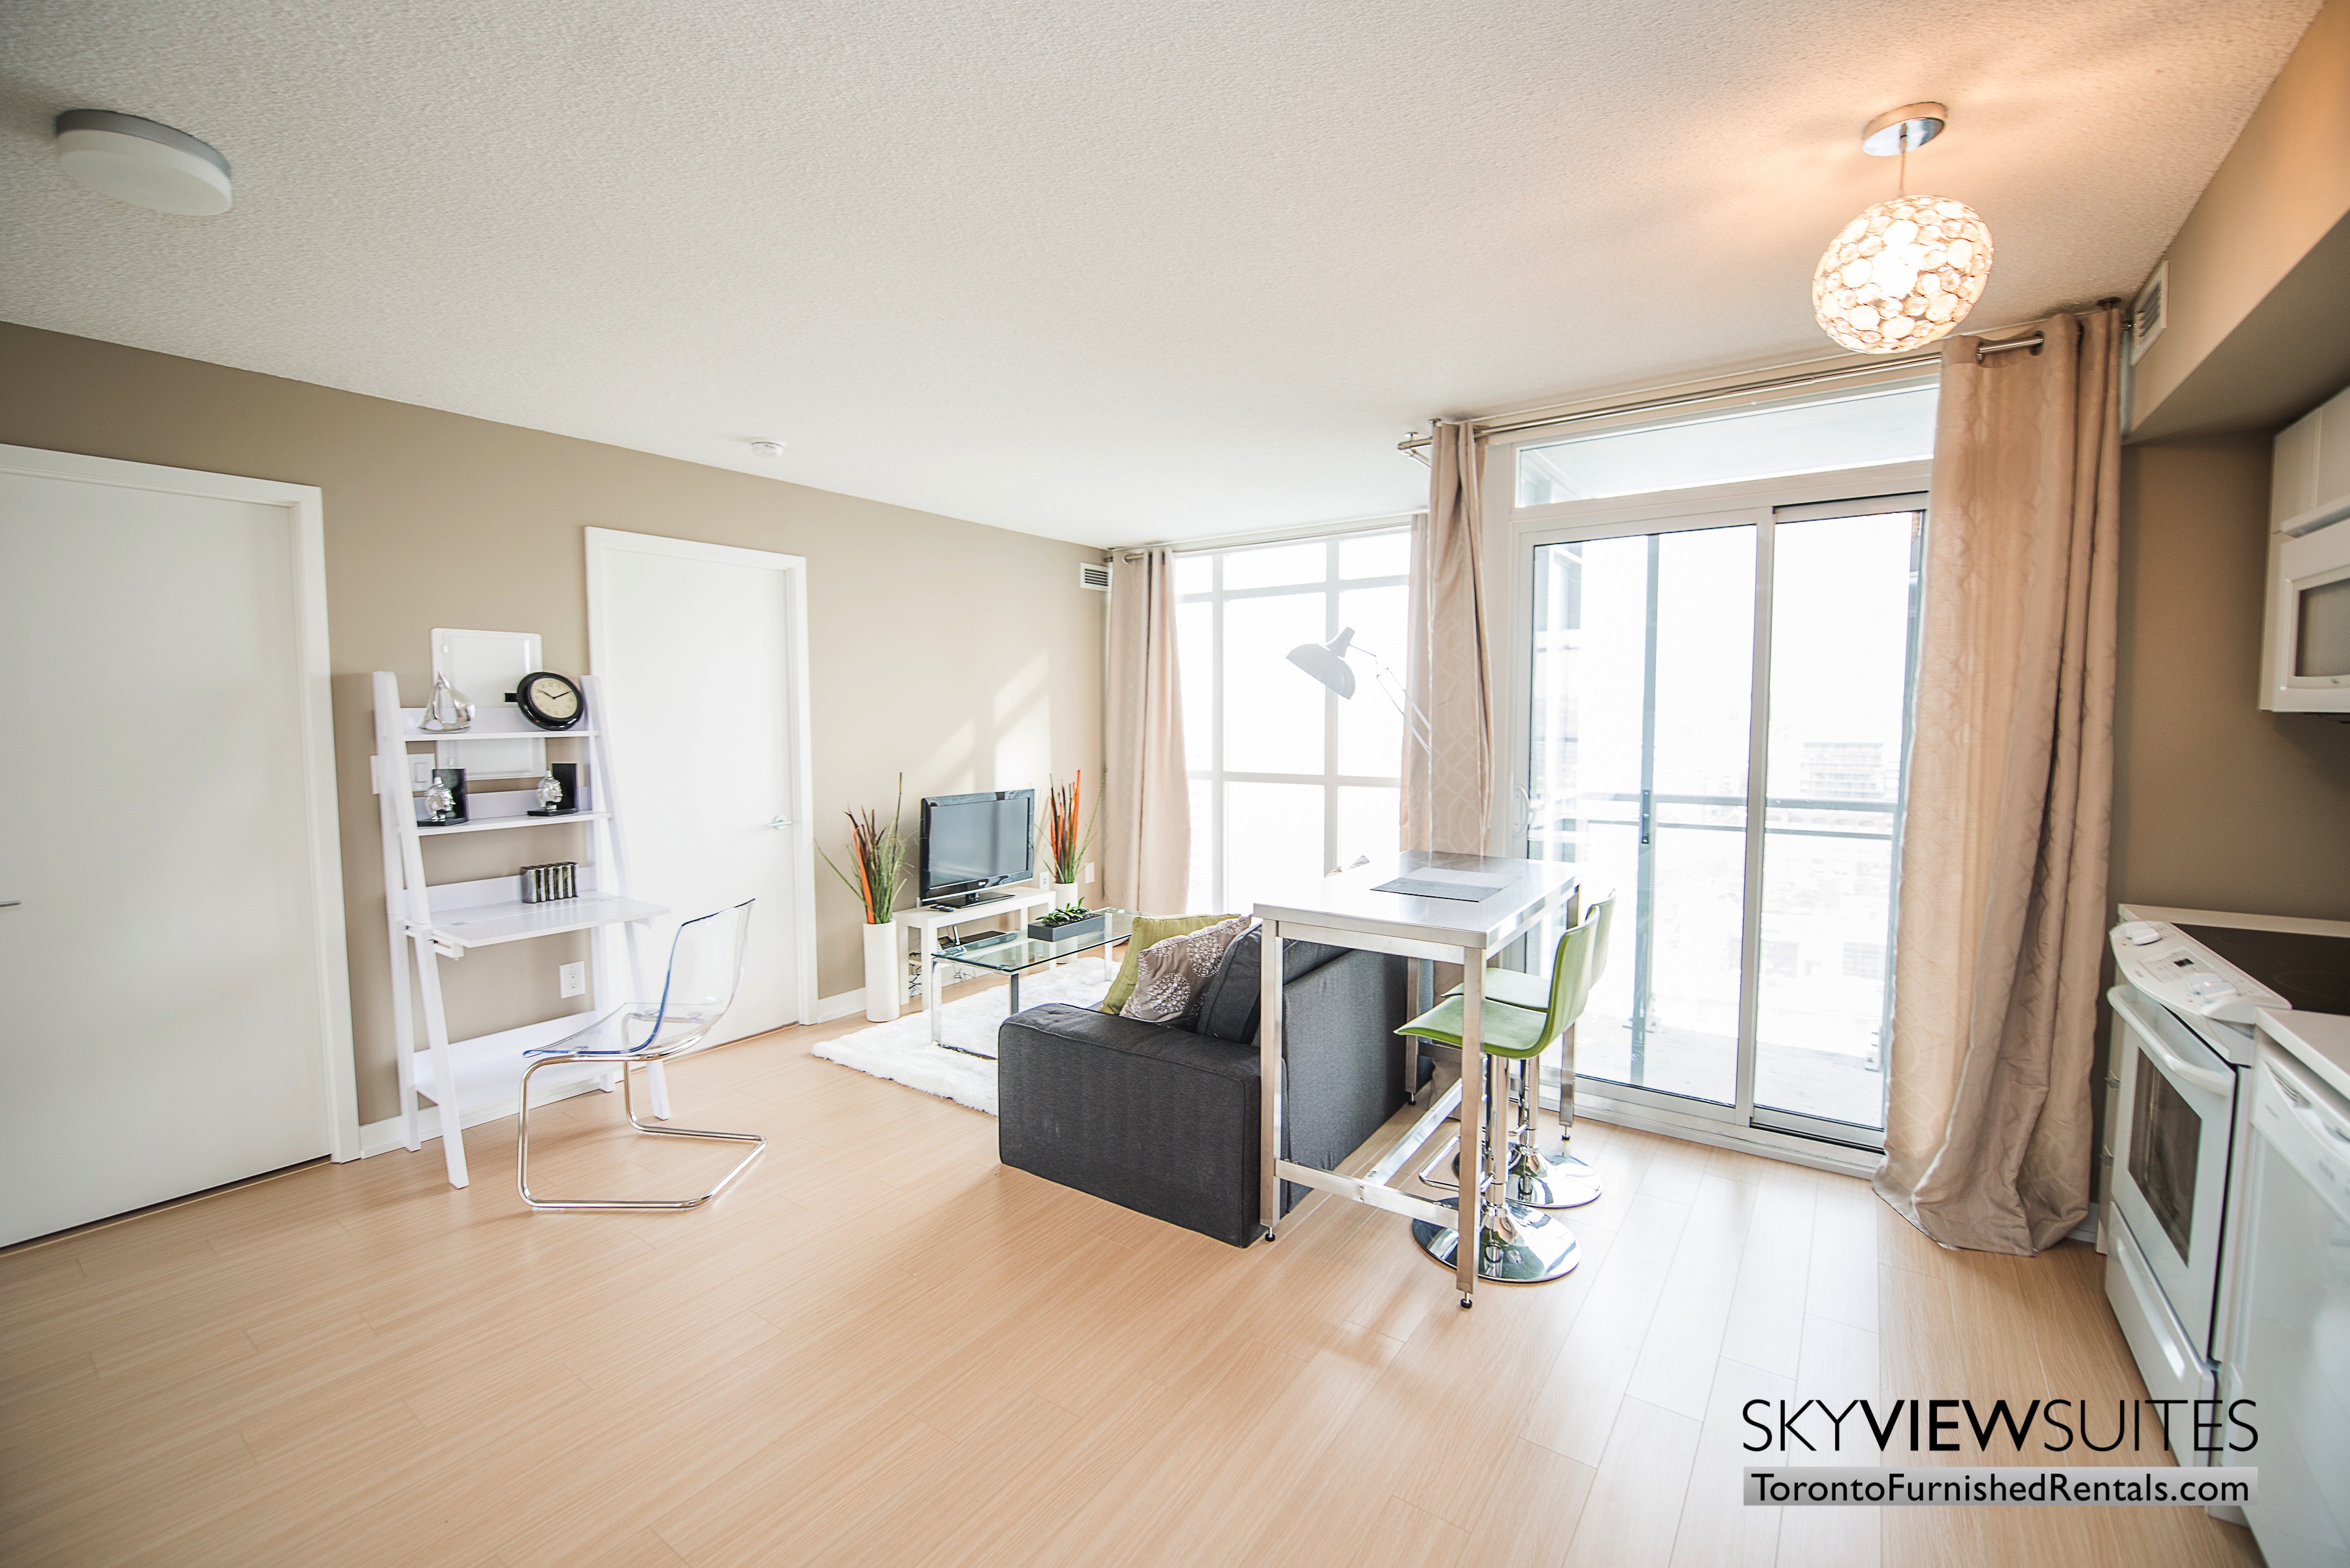 furnished apartments toronto parade living room kitchen and dining table